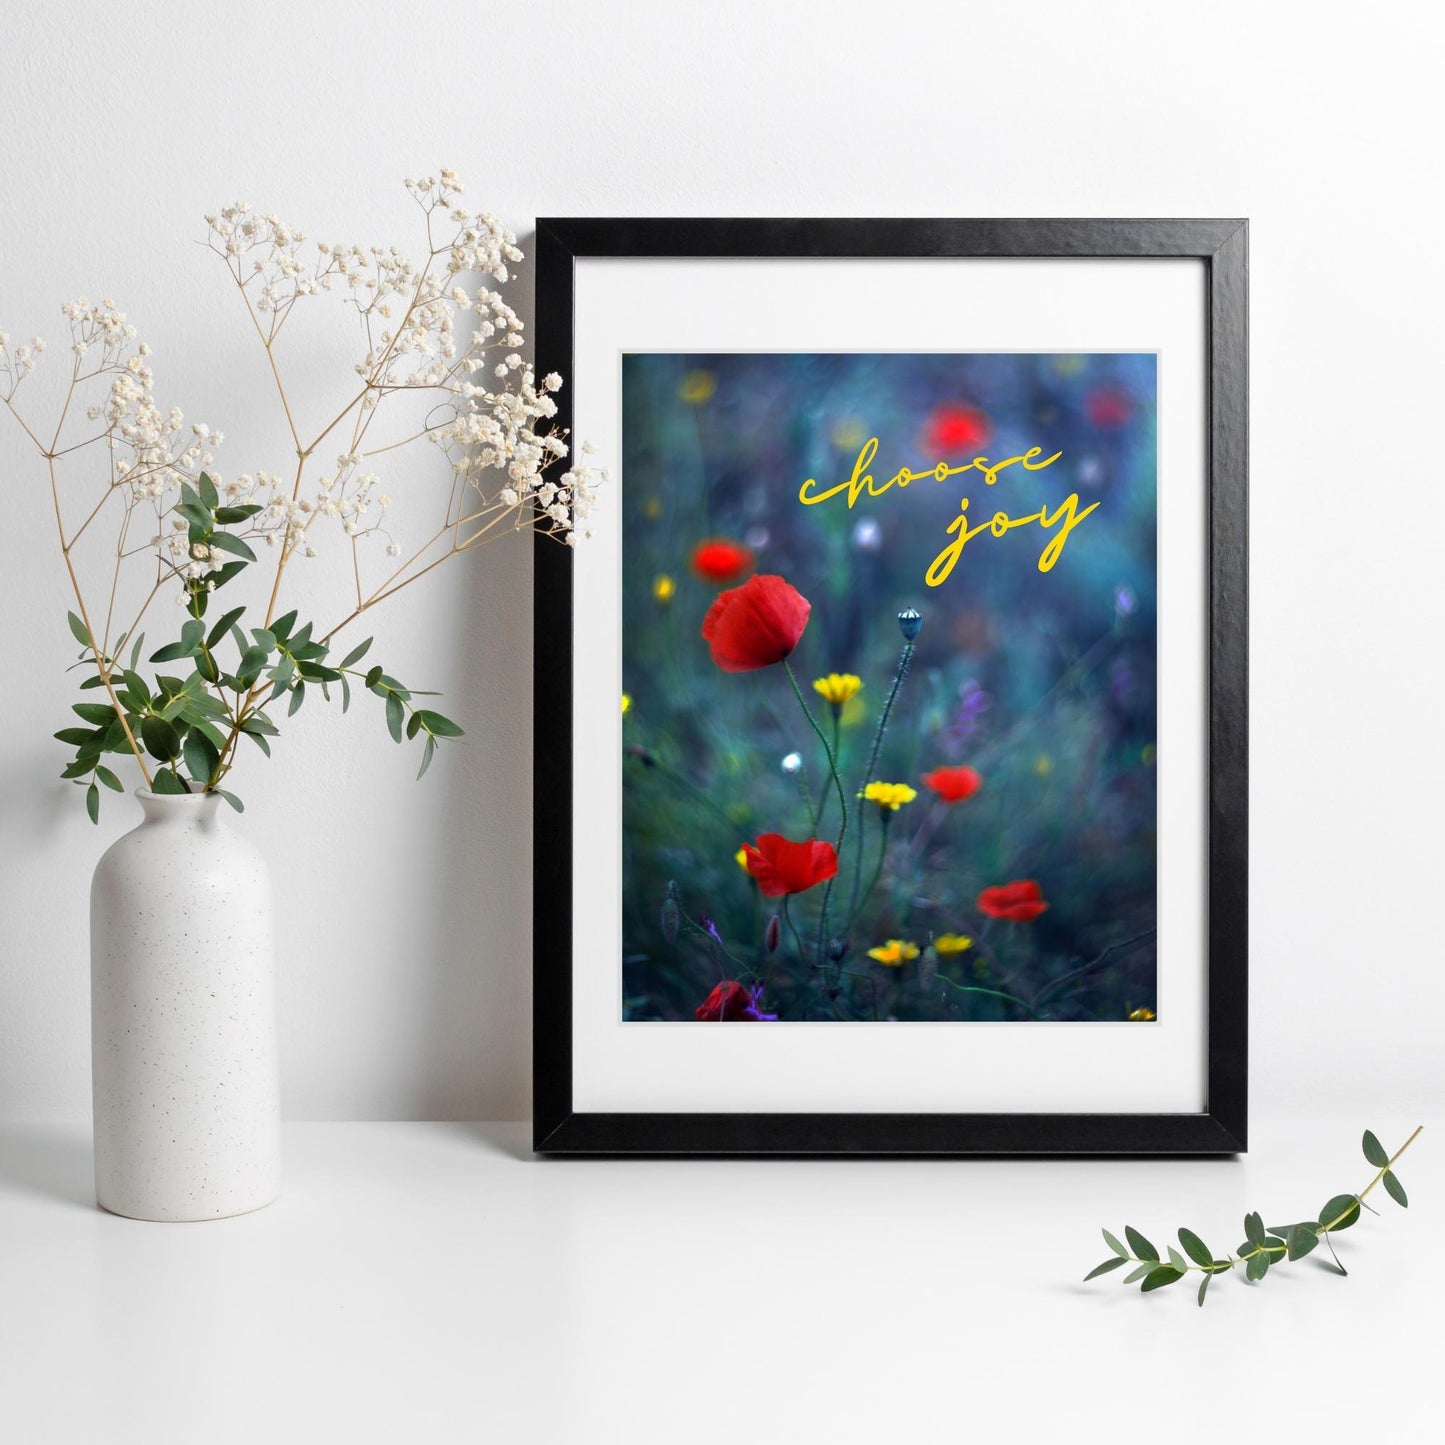 Inspirational Word Art - choose joy - Vibrant Red and Cheerful Yellow Floral Wall Decor (8x10 print) | Vibrant red flowers and dainty yellow flowers with blues and greens | shown in black frame against white wall | oak7west.com